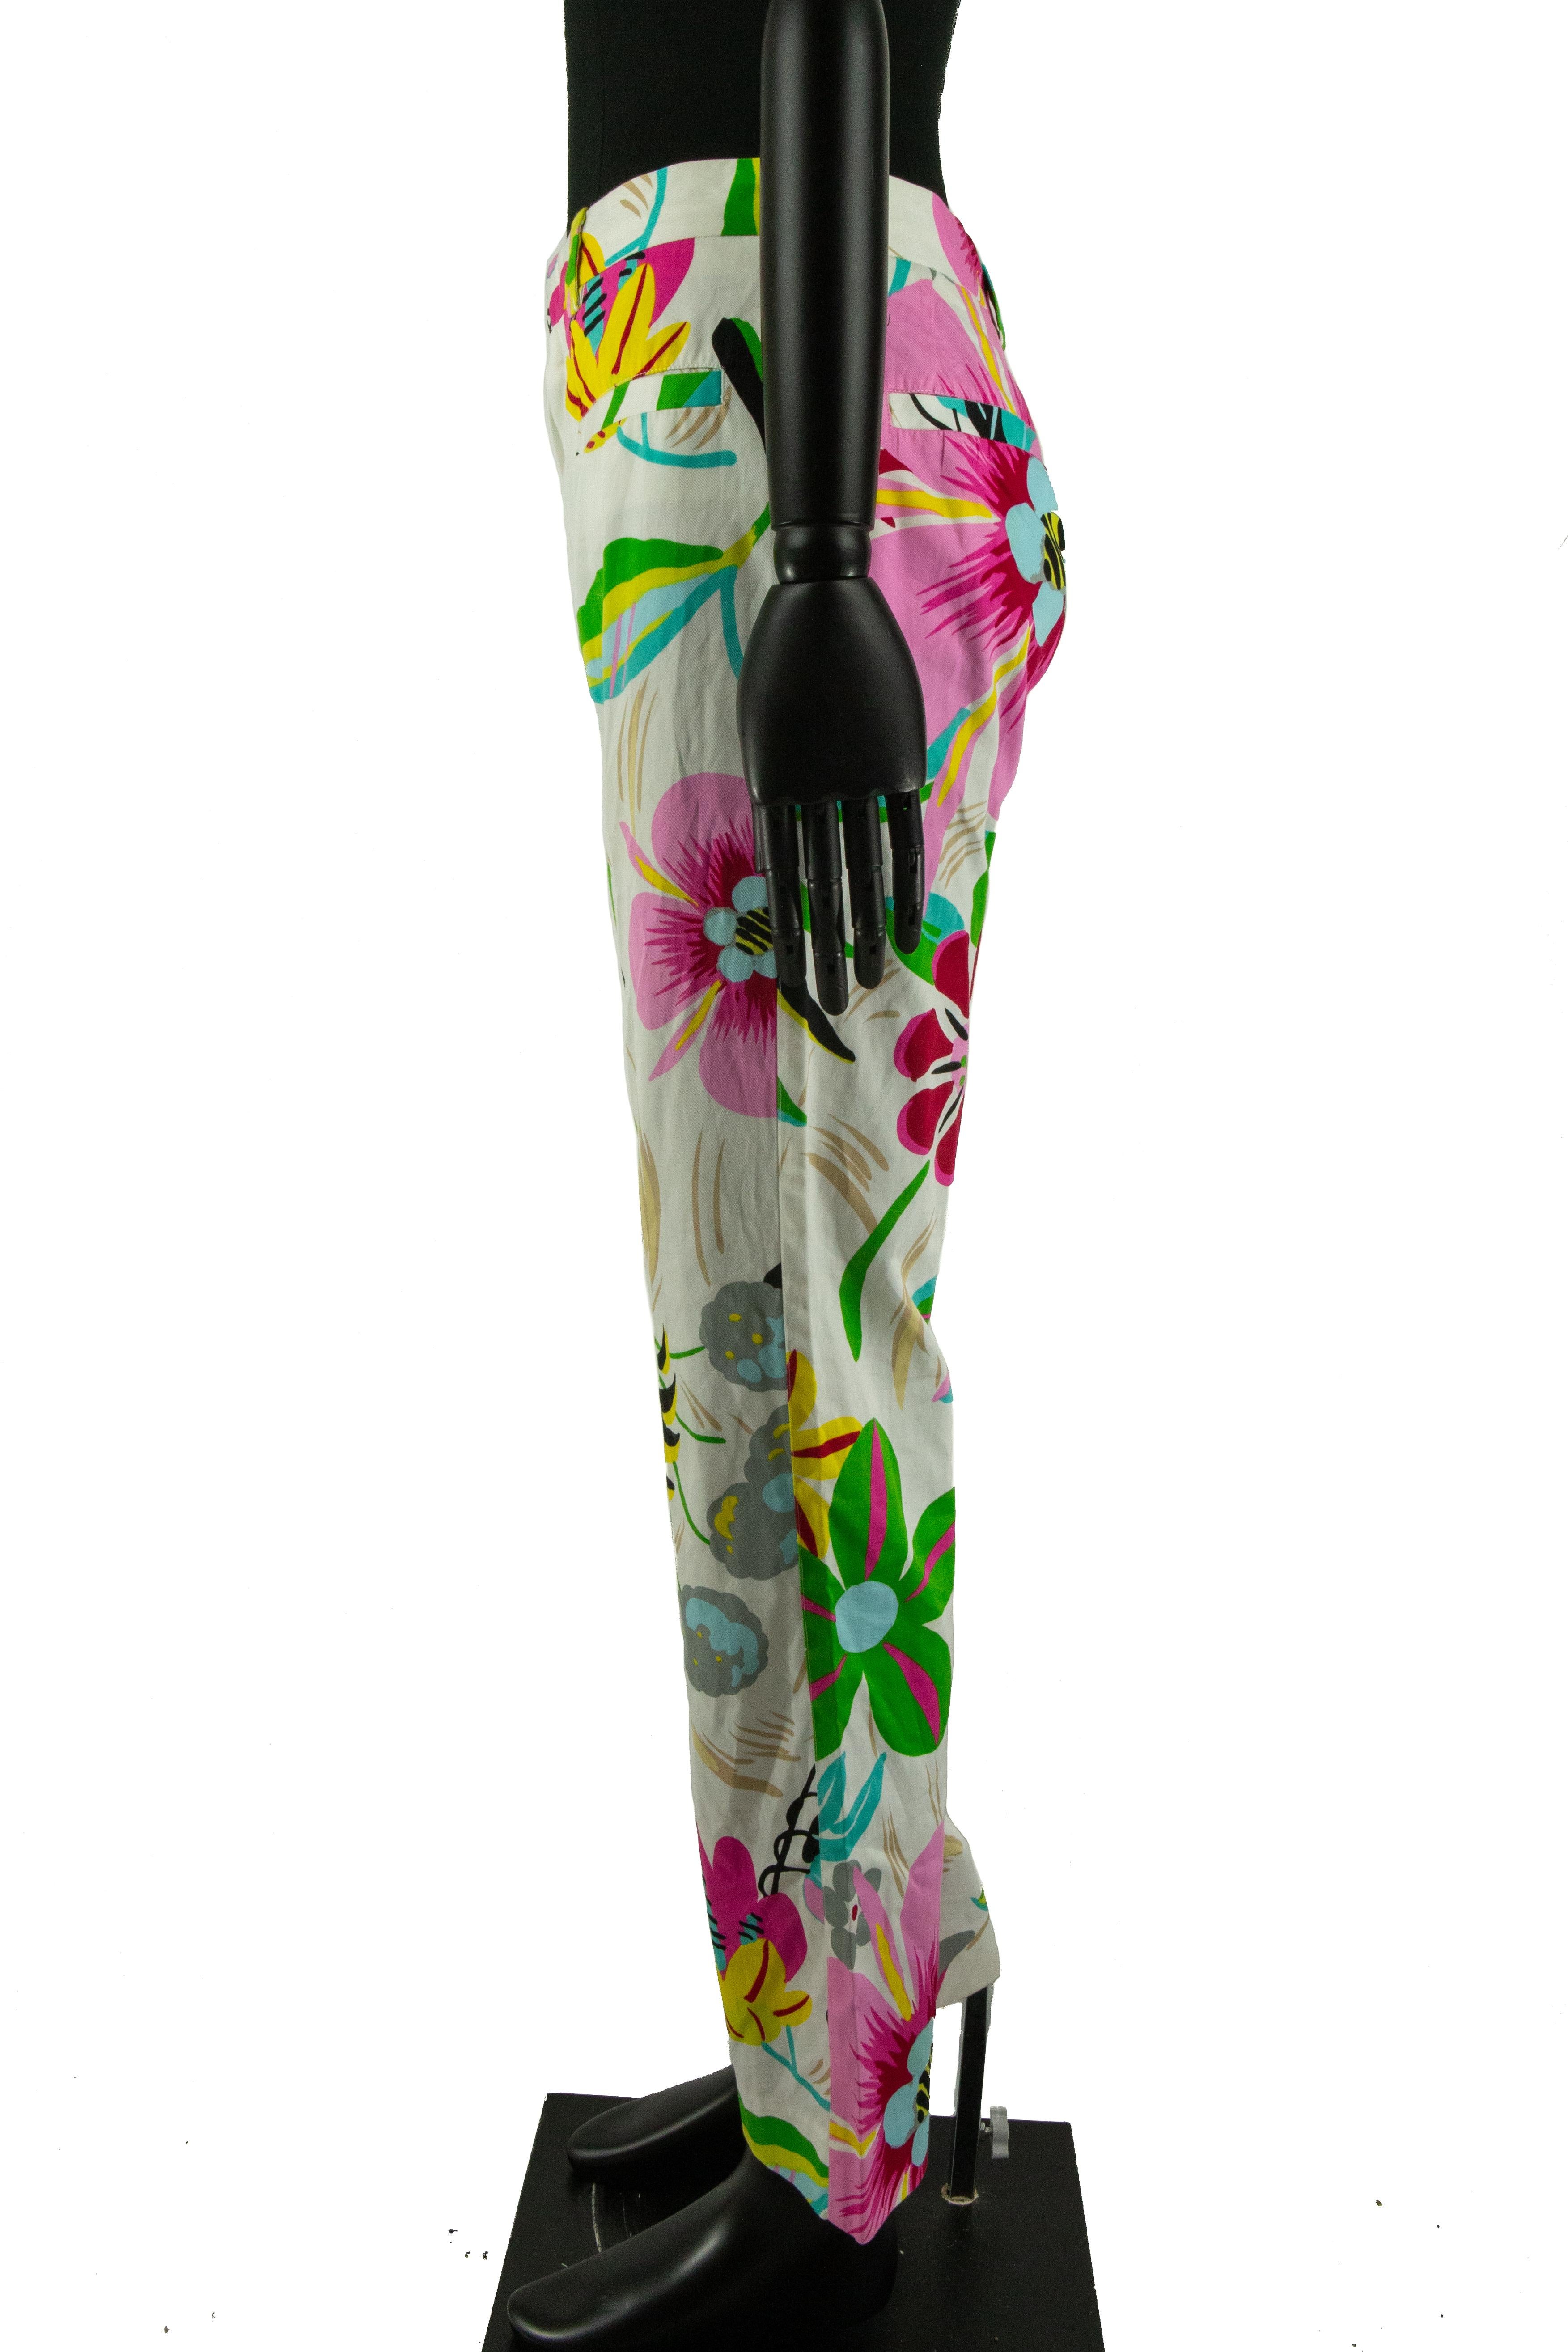 These Spring / Summer 1999 Tom Ford era Gucci trousers are covered in a print of illustrated leaves and flowers in a bright tetradic colour palette. The trousers are straight legged and cropped, featuring 4 faux pockets, belt loops and fastened with